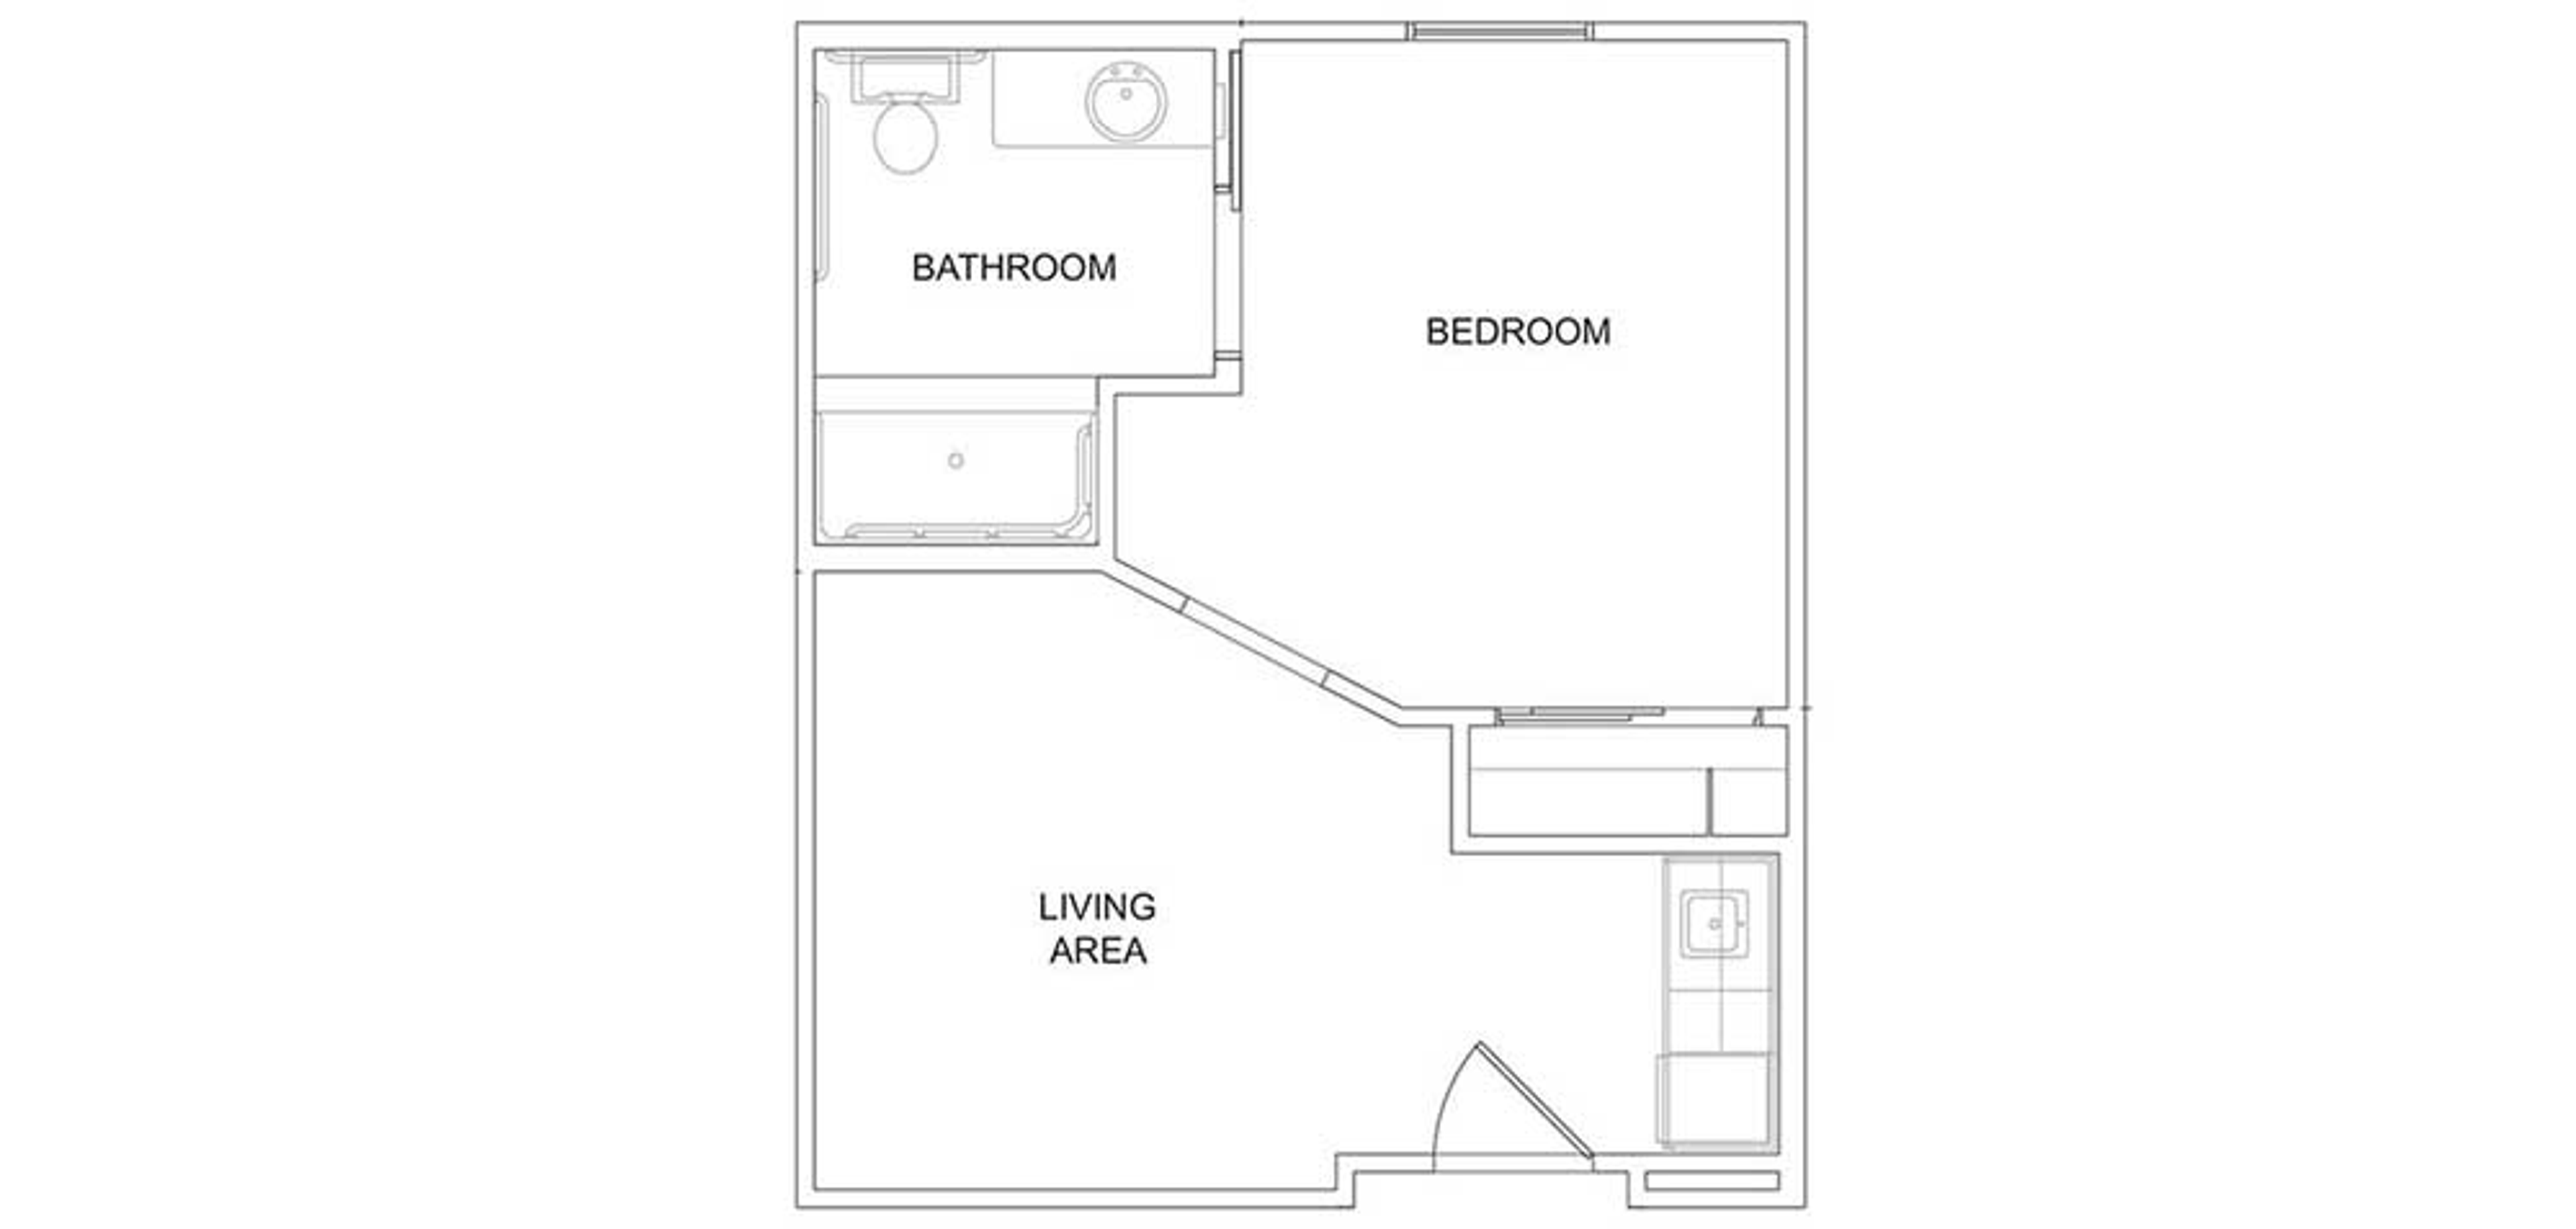 Floorplan - Pecan Pointe - 1 bed, 1 bath, Deluxe Assisted Living